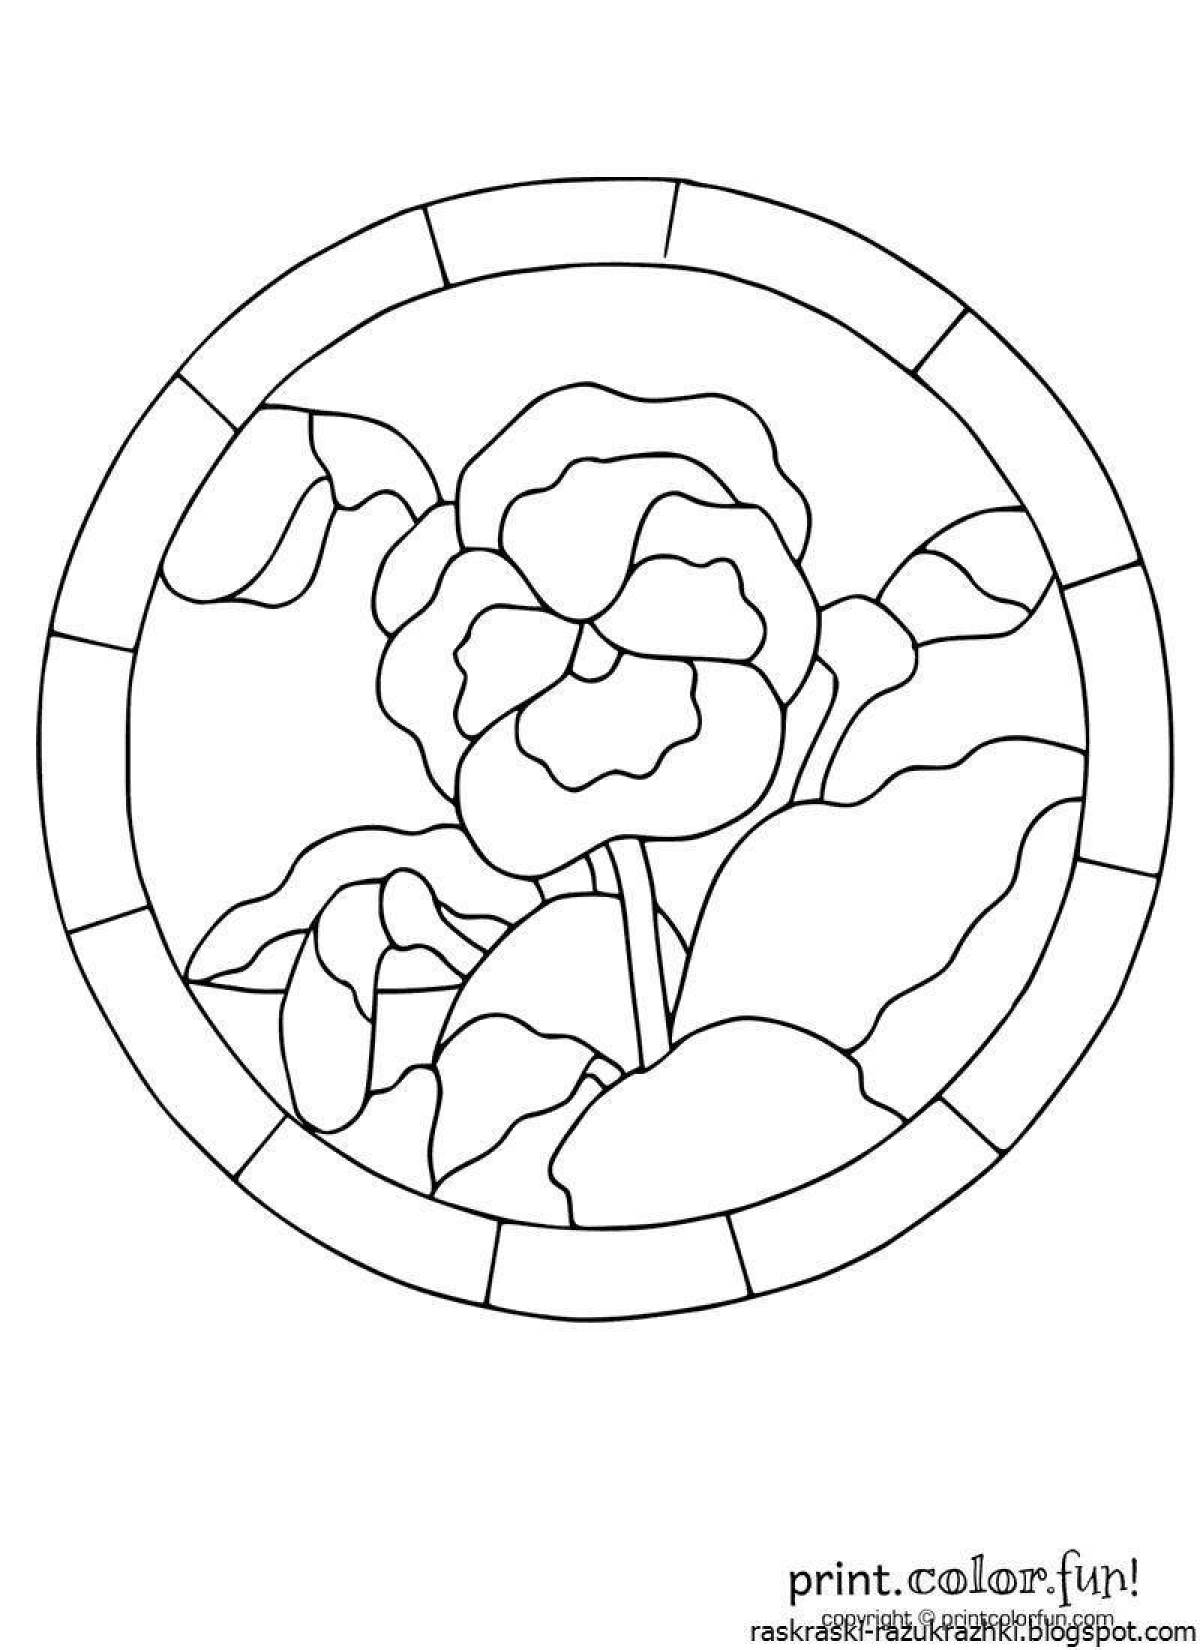 Vibrant stained glass coloring pages for kids